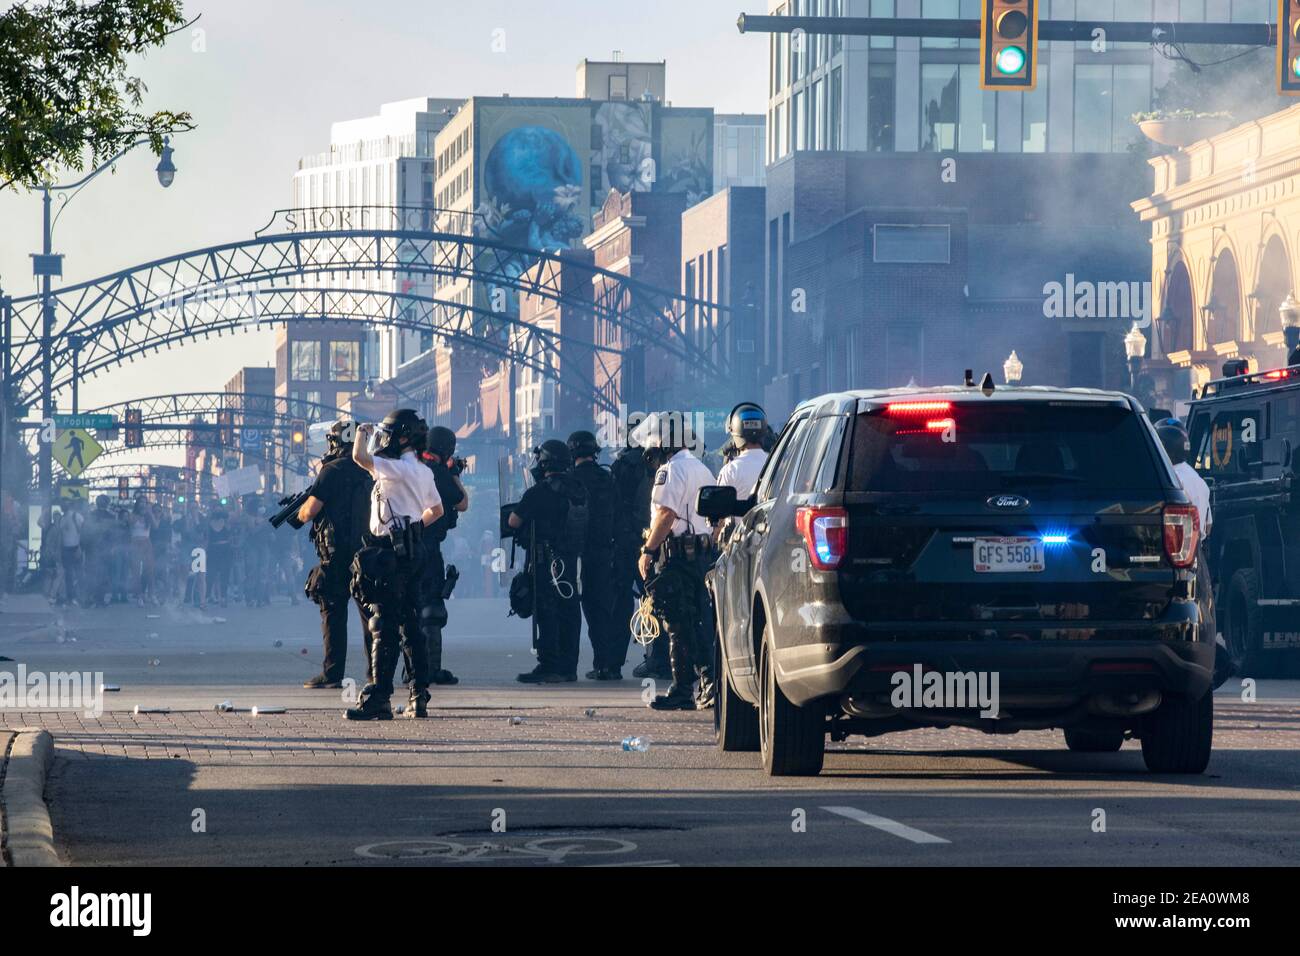 Columbus, Ohio, USA. 30th May, 2020. Columbus Police and SWAT officers fire tear gas canisters to disperse protesters during the demonstration.Five days after the death of George Floyd at the hands of Minneapolis Police Officer Derek Chauvin Columbus, Ohio declared a state of emergency and imposed a curfew from 10pm to 6am to deal with the large scale protests happening in the city. The Ohio National Guard were called in at 3pm to help quell the protests and stop any rioting. National Guard and Riot officers pushed protesters north on High St. tear gassing and arresting protesters. (C Stock Photo